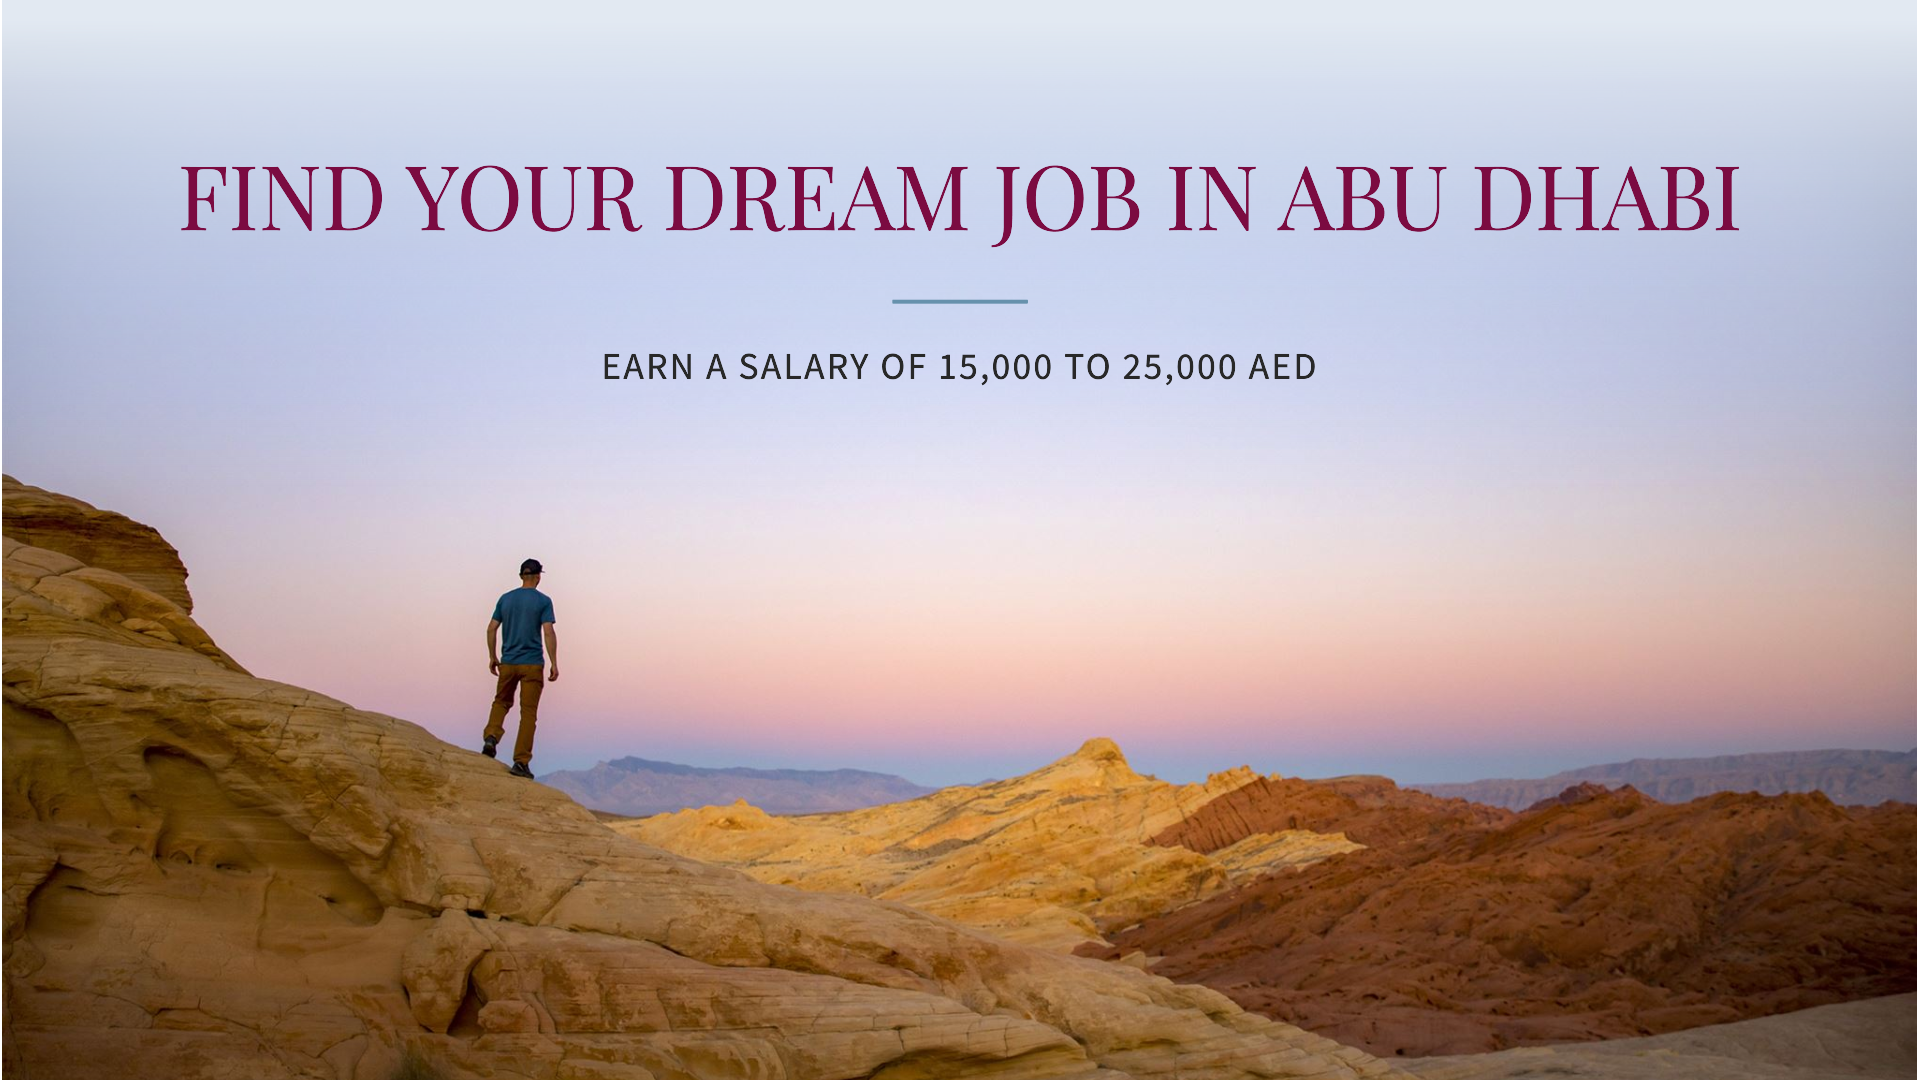 hr jobs in abu dhabi with salary 15,000 to 25,000 AED